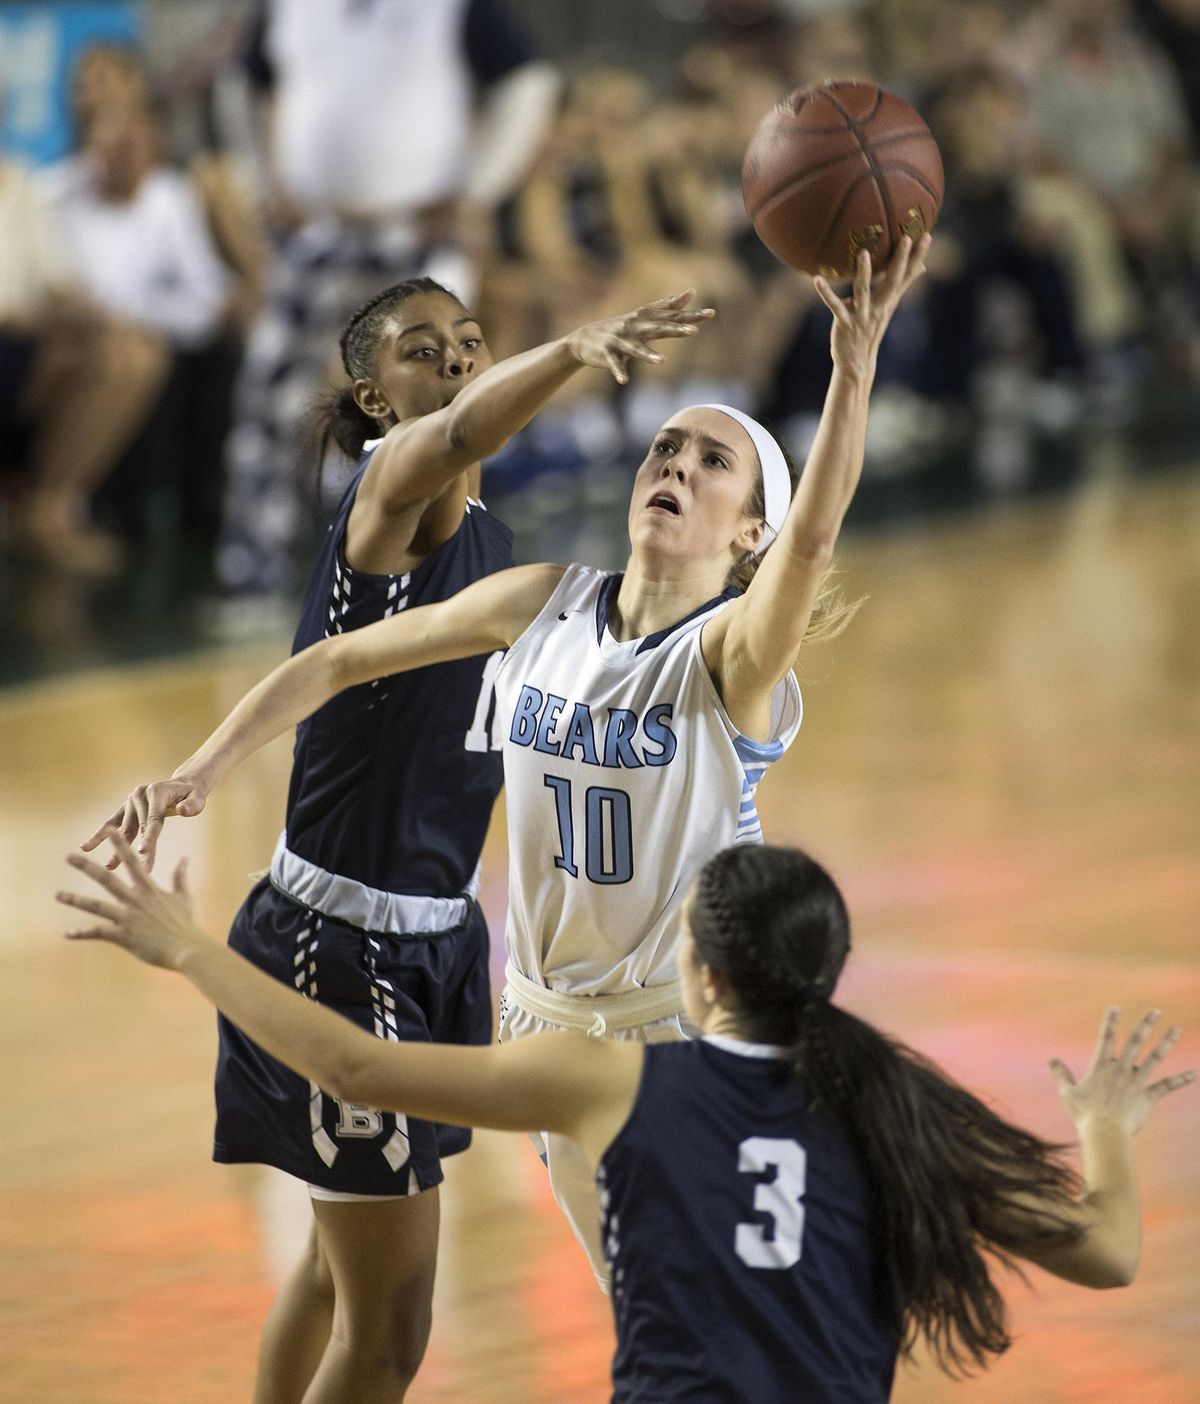 Central Valley’s Lexie Hull, middle, attempts a shot between the defense of Bellarmine Prep’s Shalyse Smith, left, and Madeline Garcia, right, Thursday, March 2, 2017, during the quarterfinals of the 4A Girls State Basketball Tournament in Tacoma. Central Valley lost the game 56-55. (Patrick Hagerty / For The Spokesman-Review)